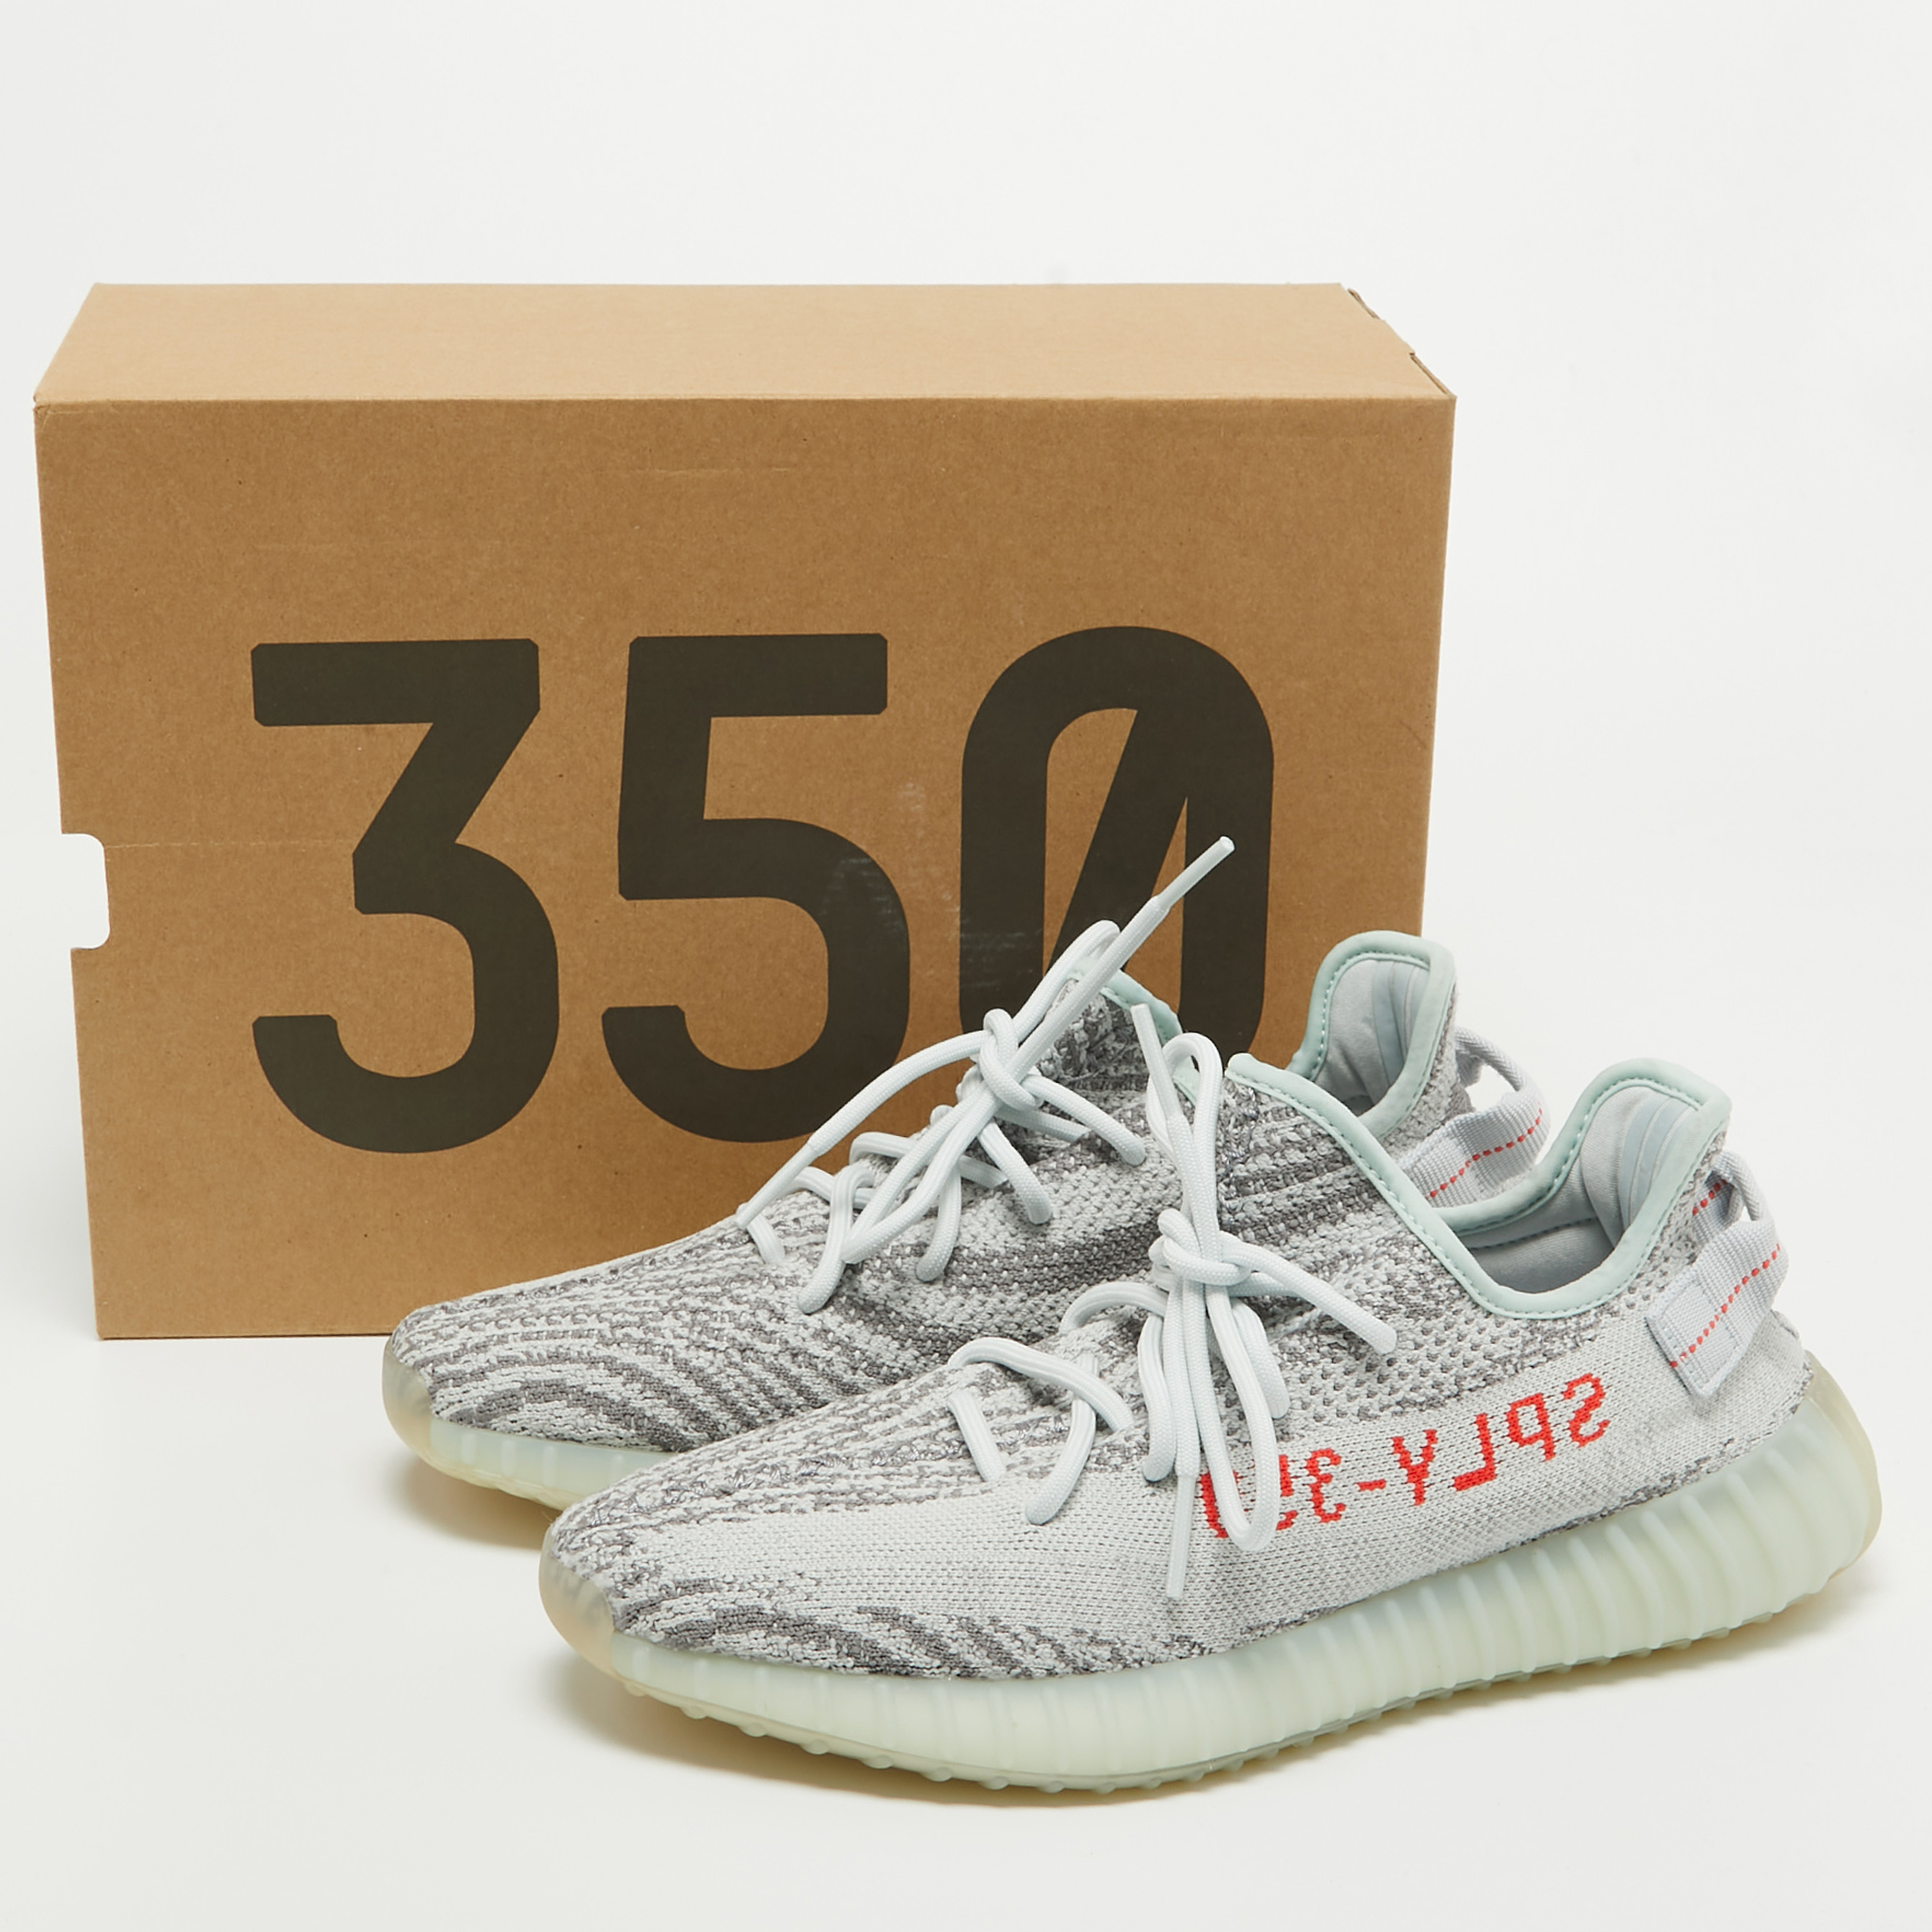 Yeezy X Adidas Grey Knit Fabric Boost 350 V2 Blue Tint Sneakers Size 42 2/3